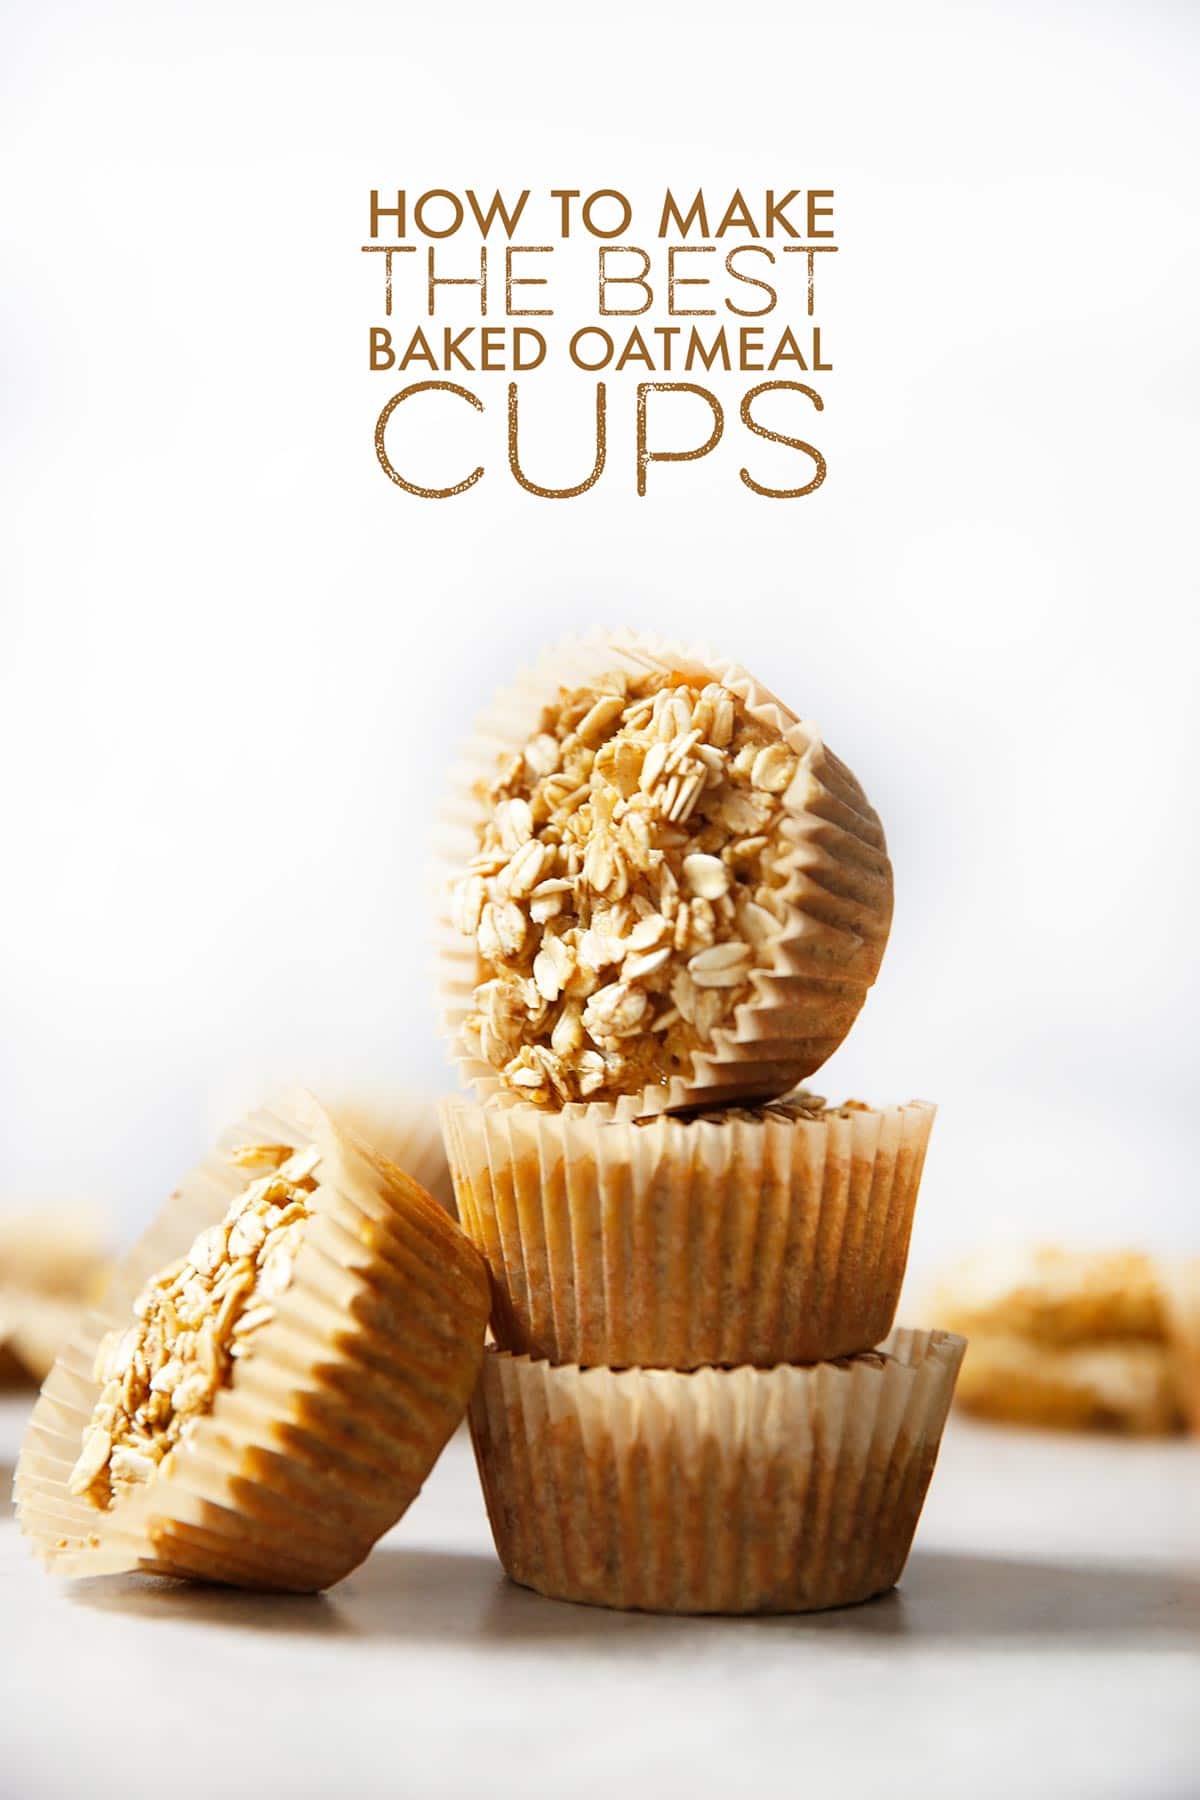 How To Make The BEST Baked Oatmeal Cups